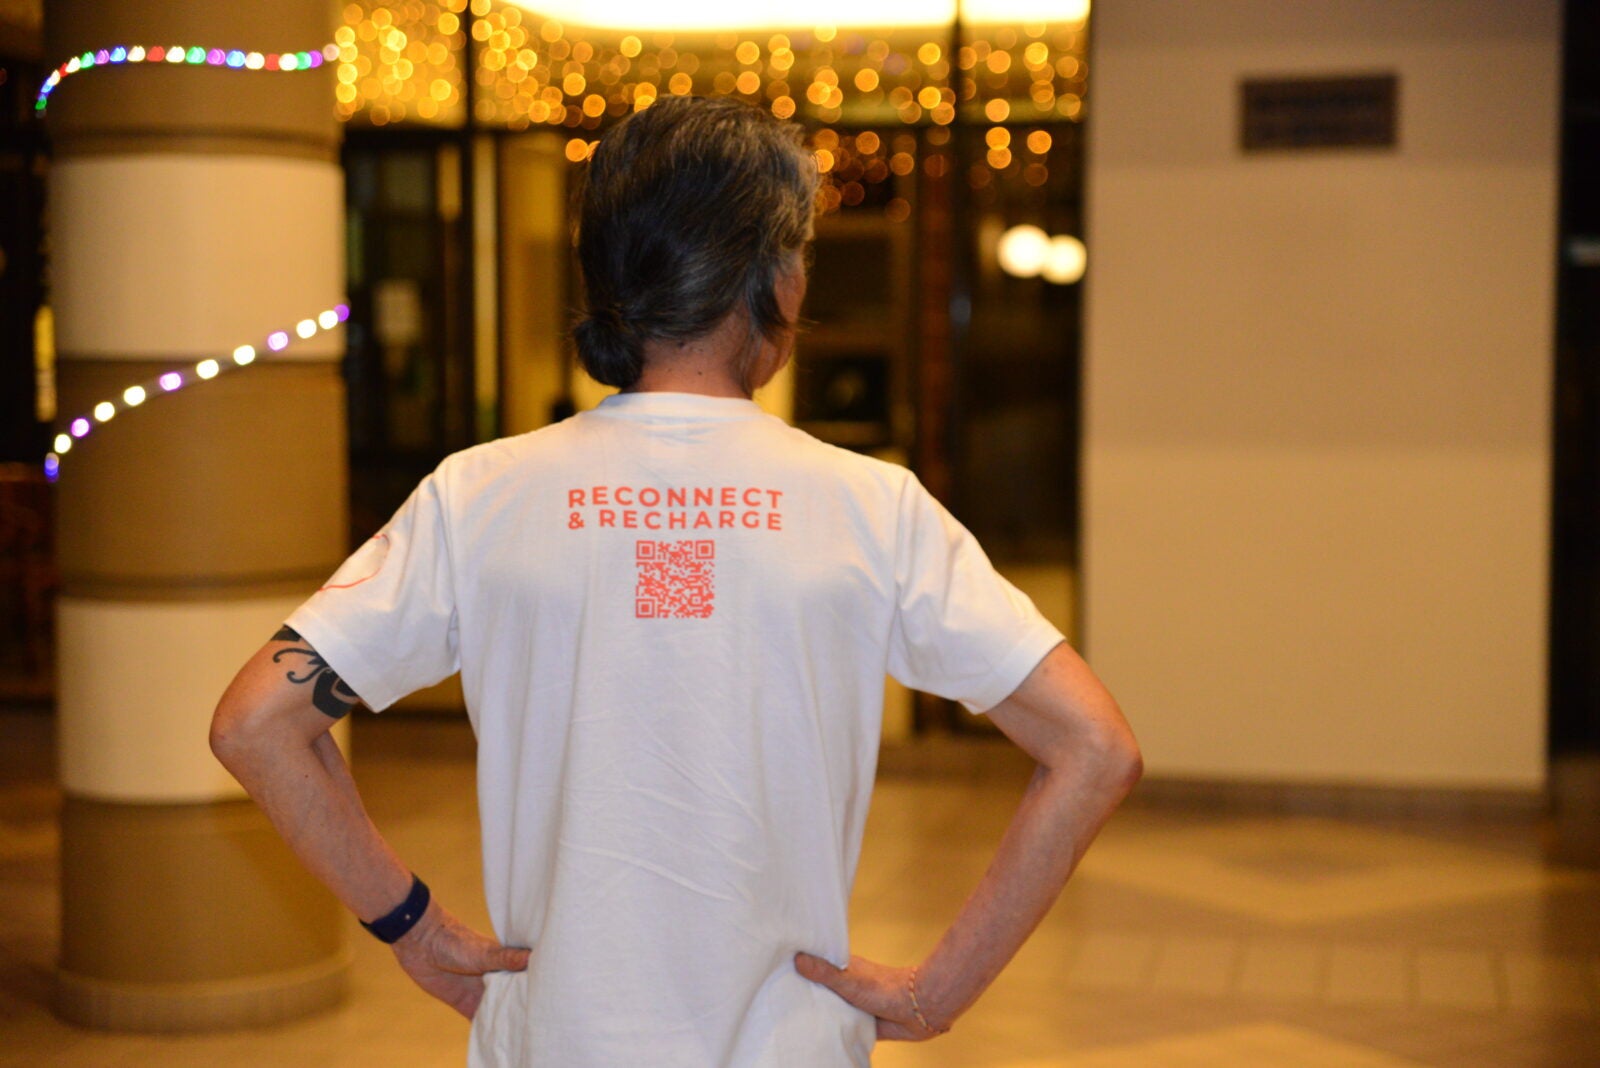 A man wearing a shirt that says reconnect and recharge faces away with his hands on his hips.